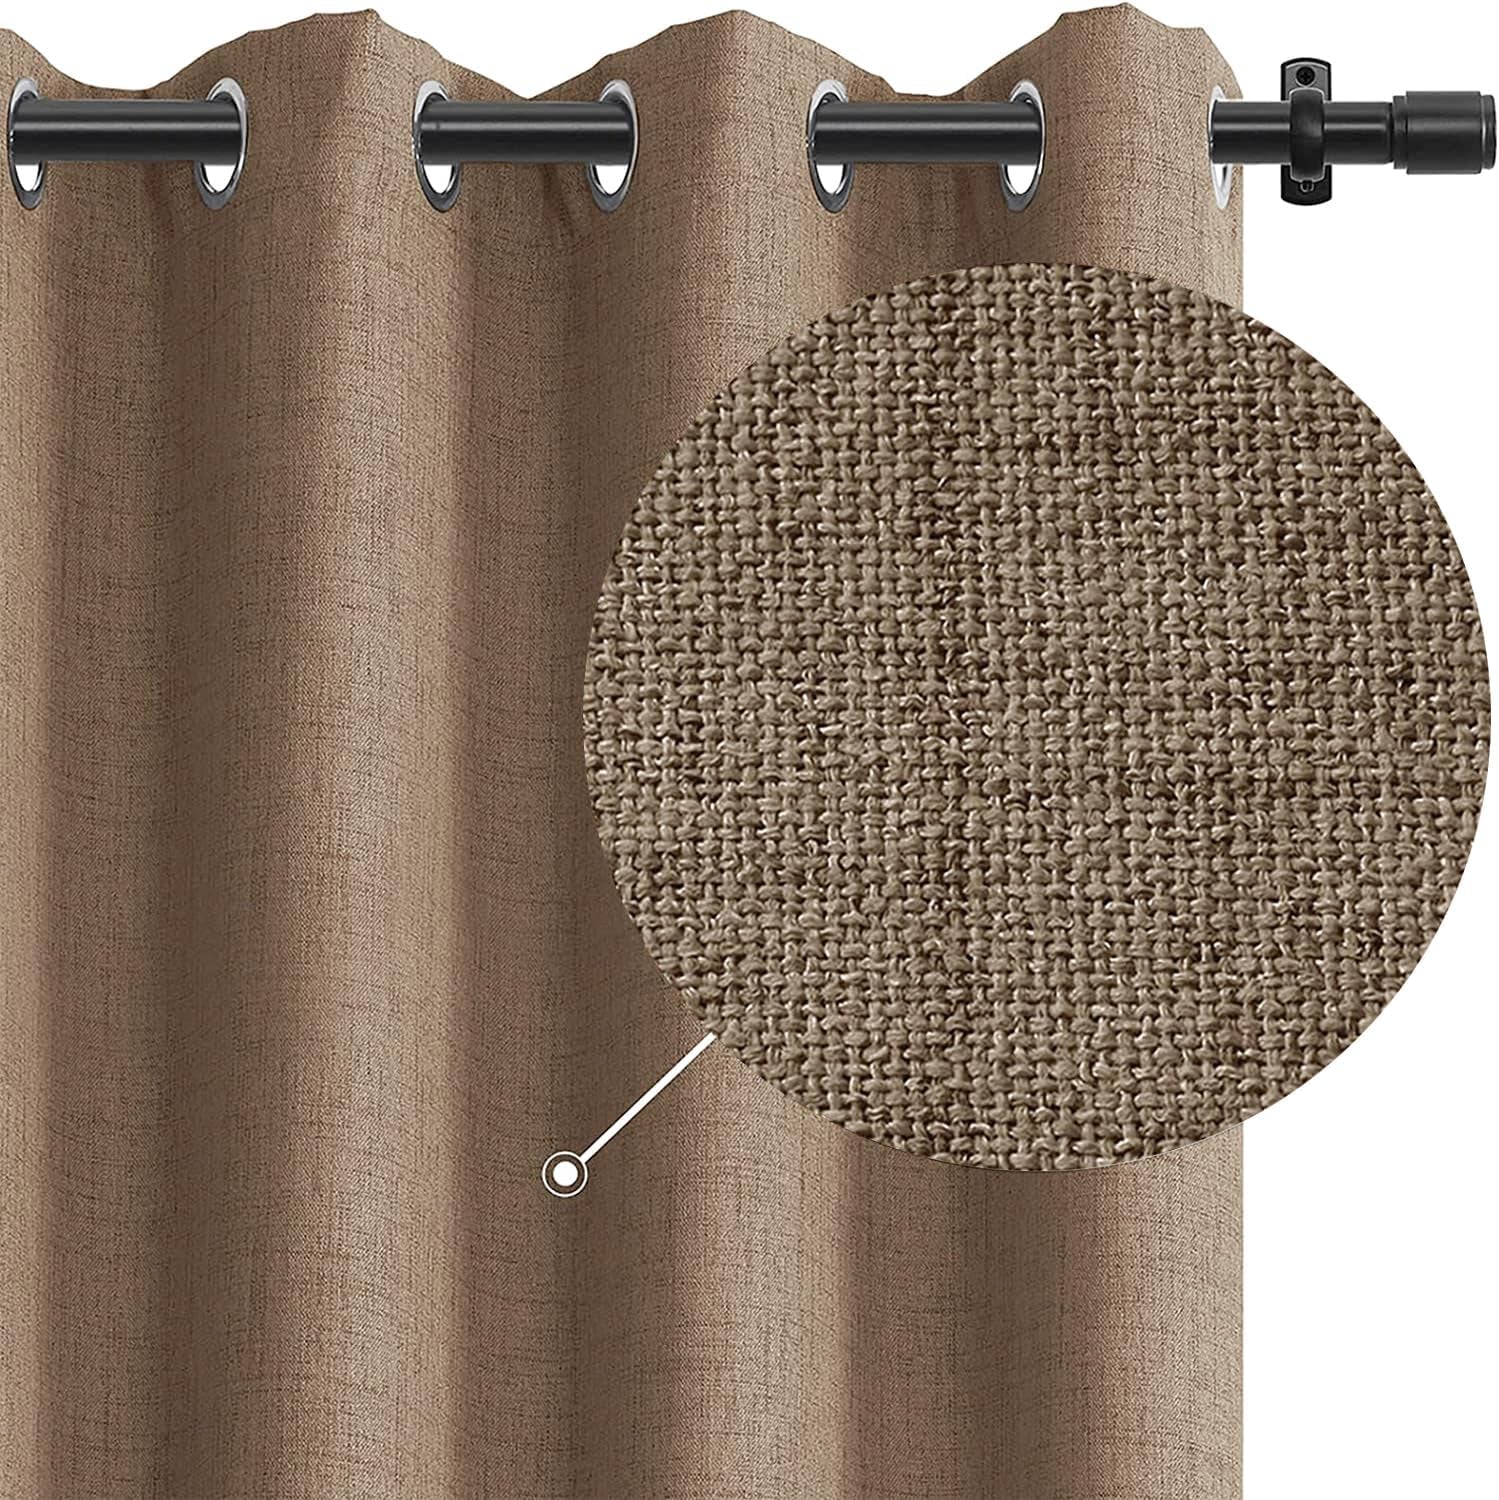 Rose Home Fashion Sliding Door Curtains, Primitive Linen Look 100% Blackout Curtains, Thermal Insulated Patio Door Curtains-1 Panel (W100 X L84, Grey)  Rose Home Fashion Chocolate W50 X L63|1 Panel 